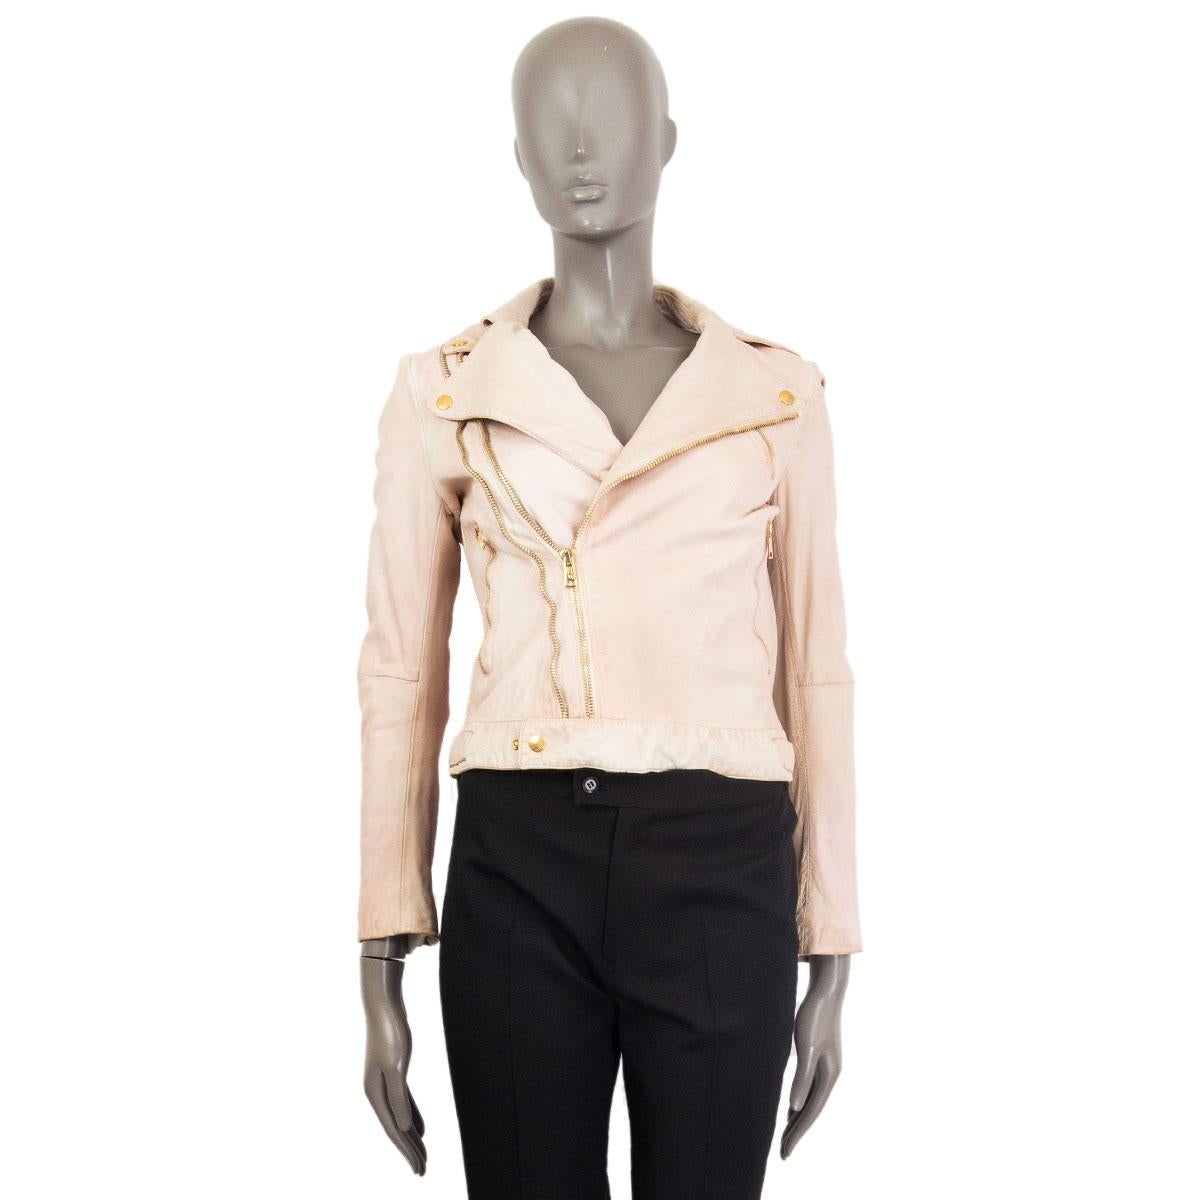 100% authentic Alexander McQueen biker jacket in pale rose distressed leather (100%) with notch collar, three zipper pockets on the front, belt loops around the waist, zippered cuffs. Collar can be held open with gold-tone snaps. Closes with